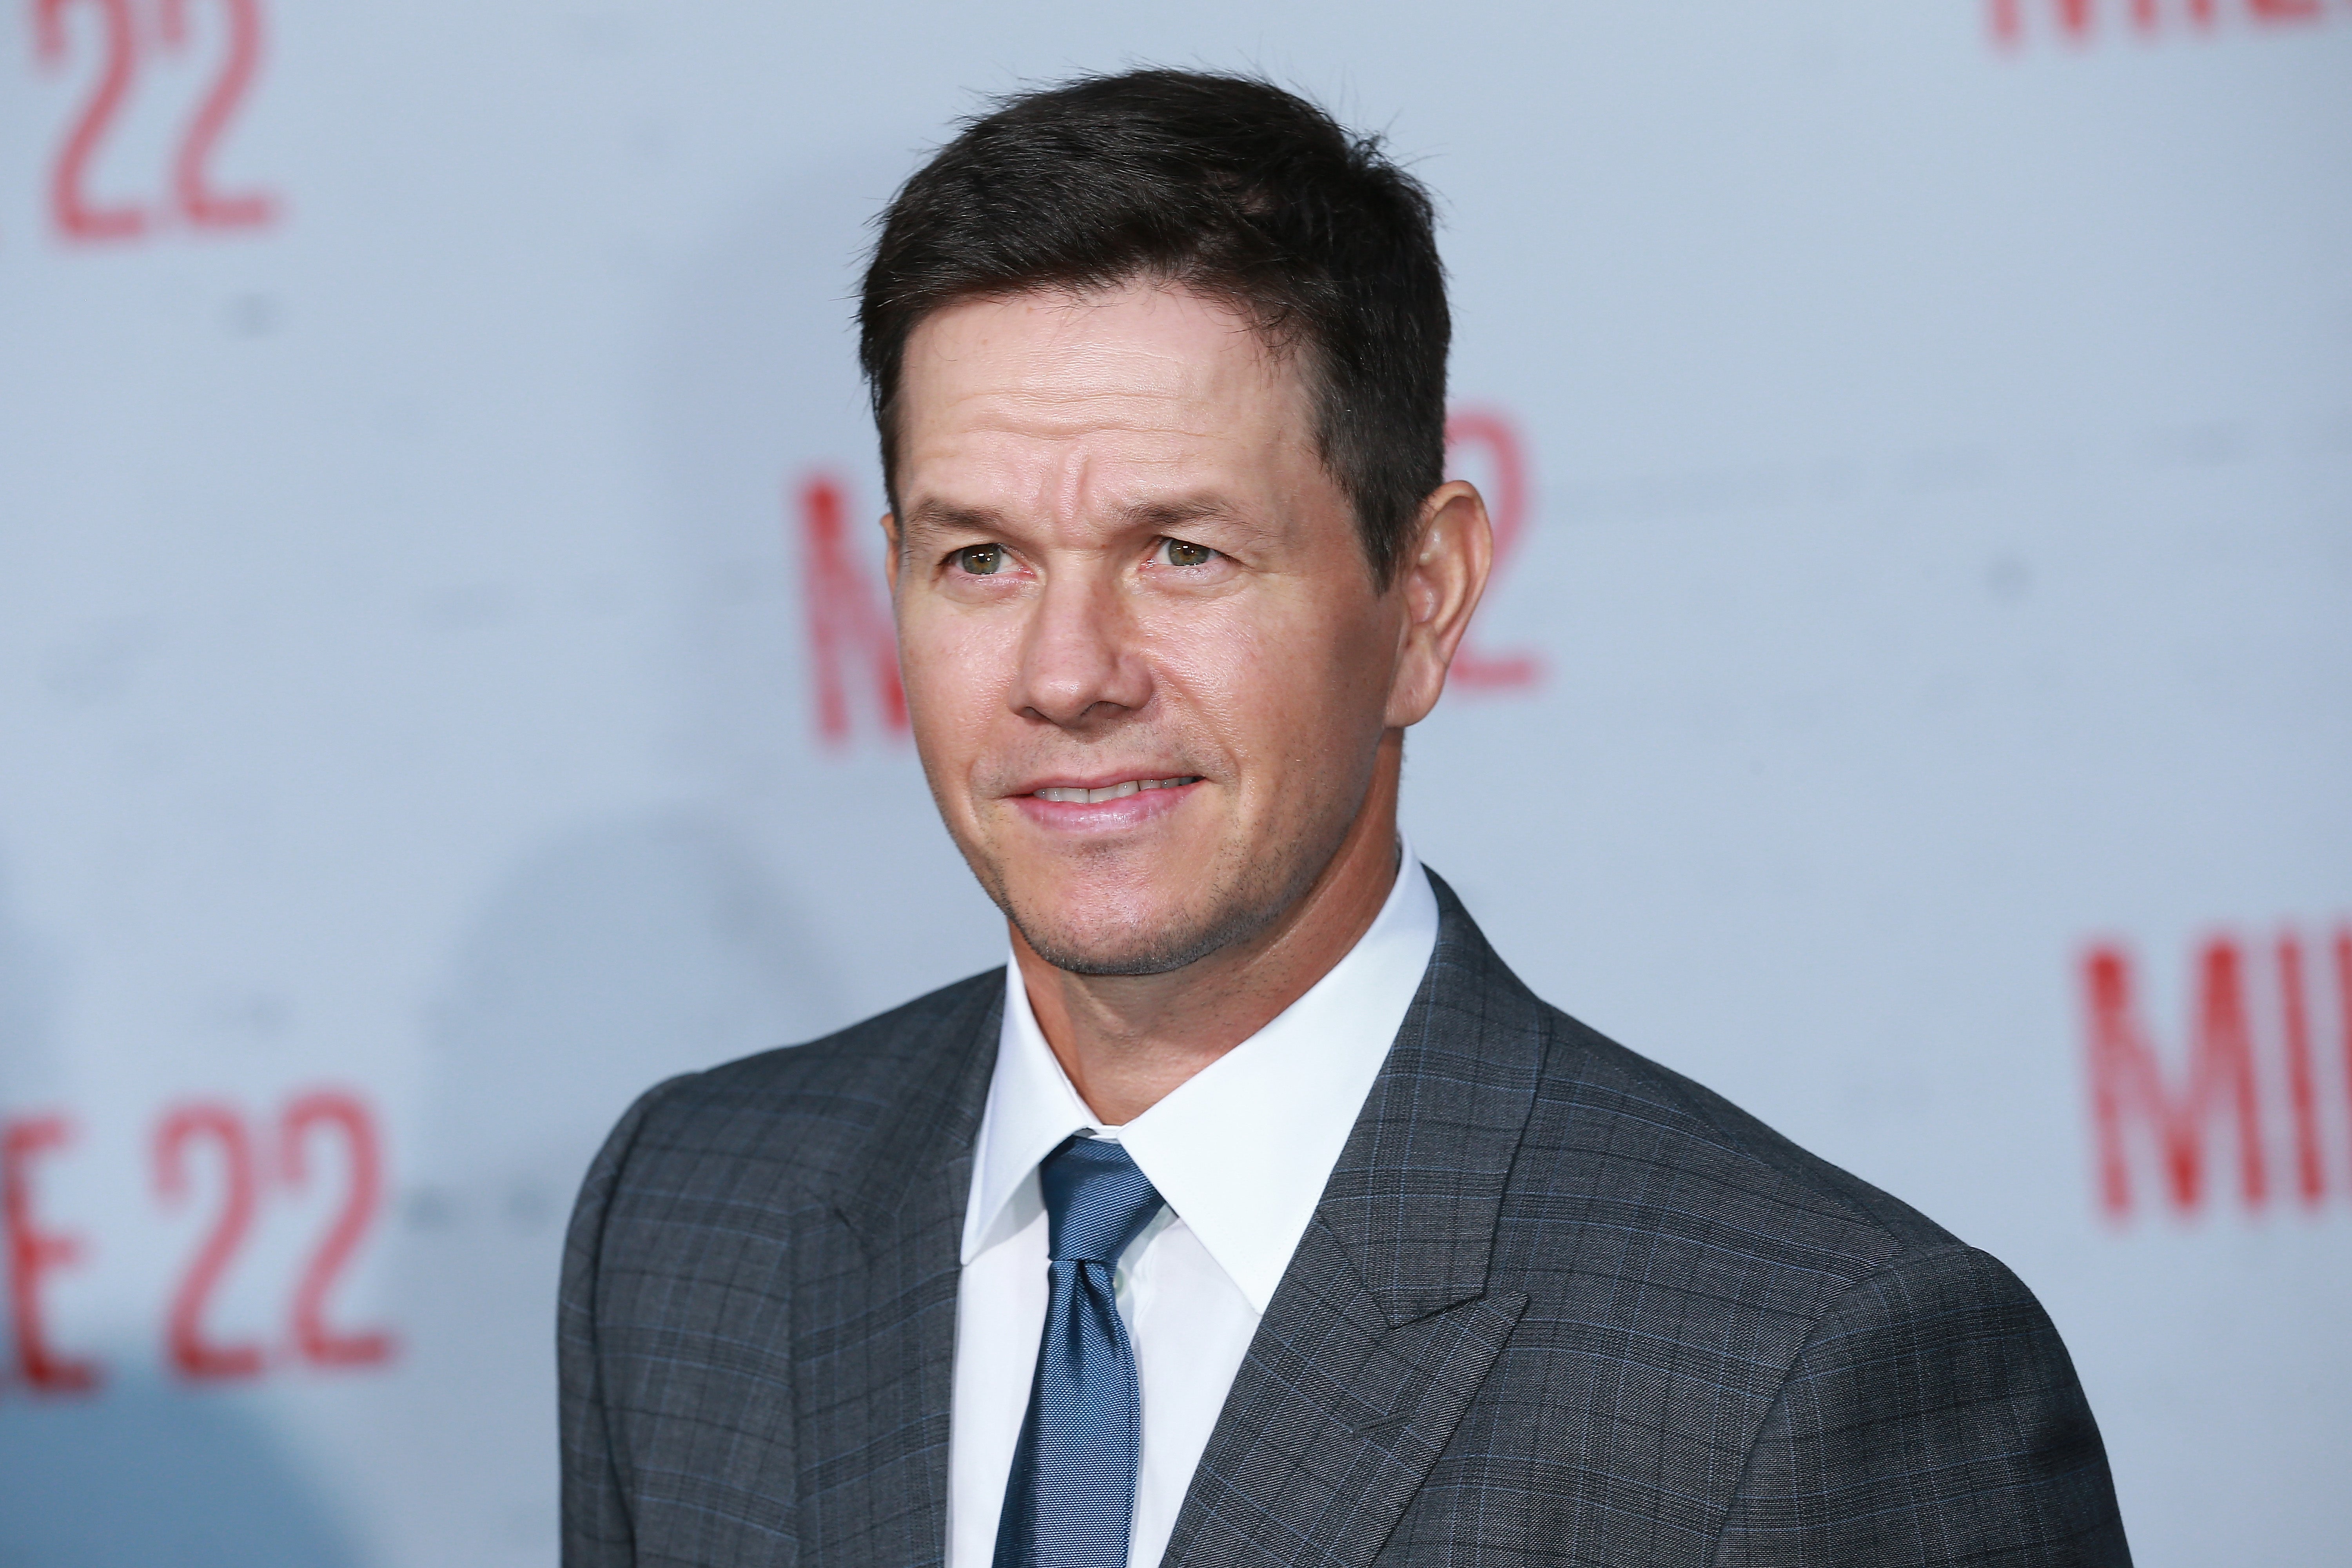 Actor Mark Wahlberg narrowly avoided boarding Flight 11, the first plane that crashed into the World Trade Center